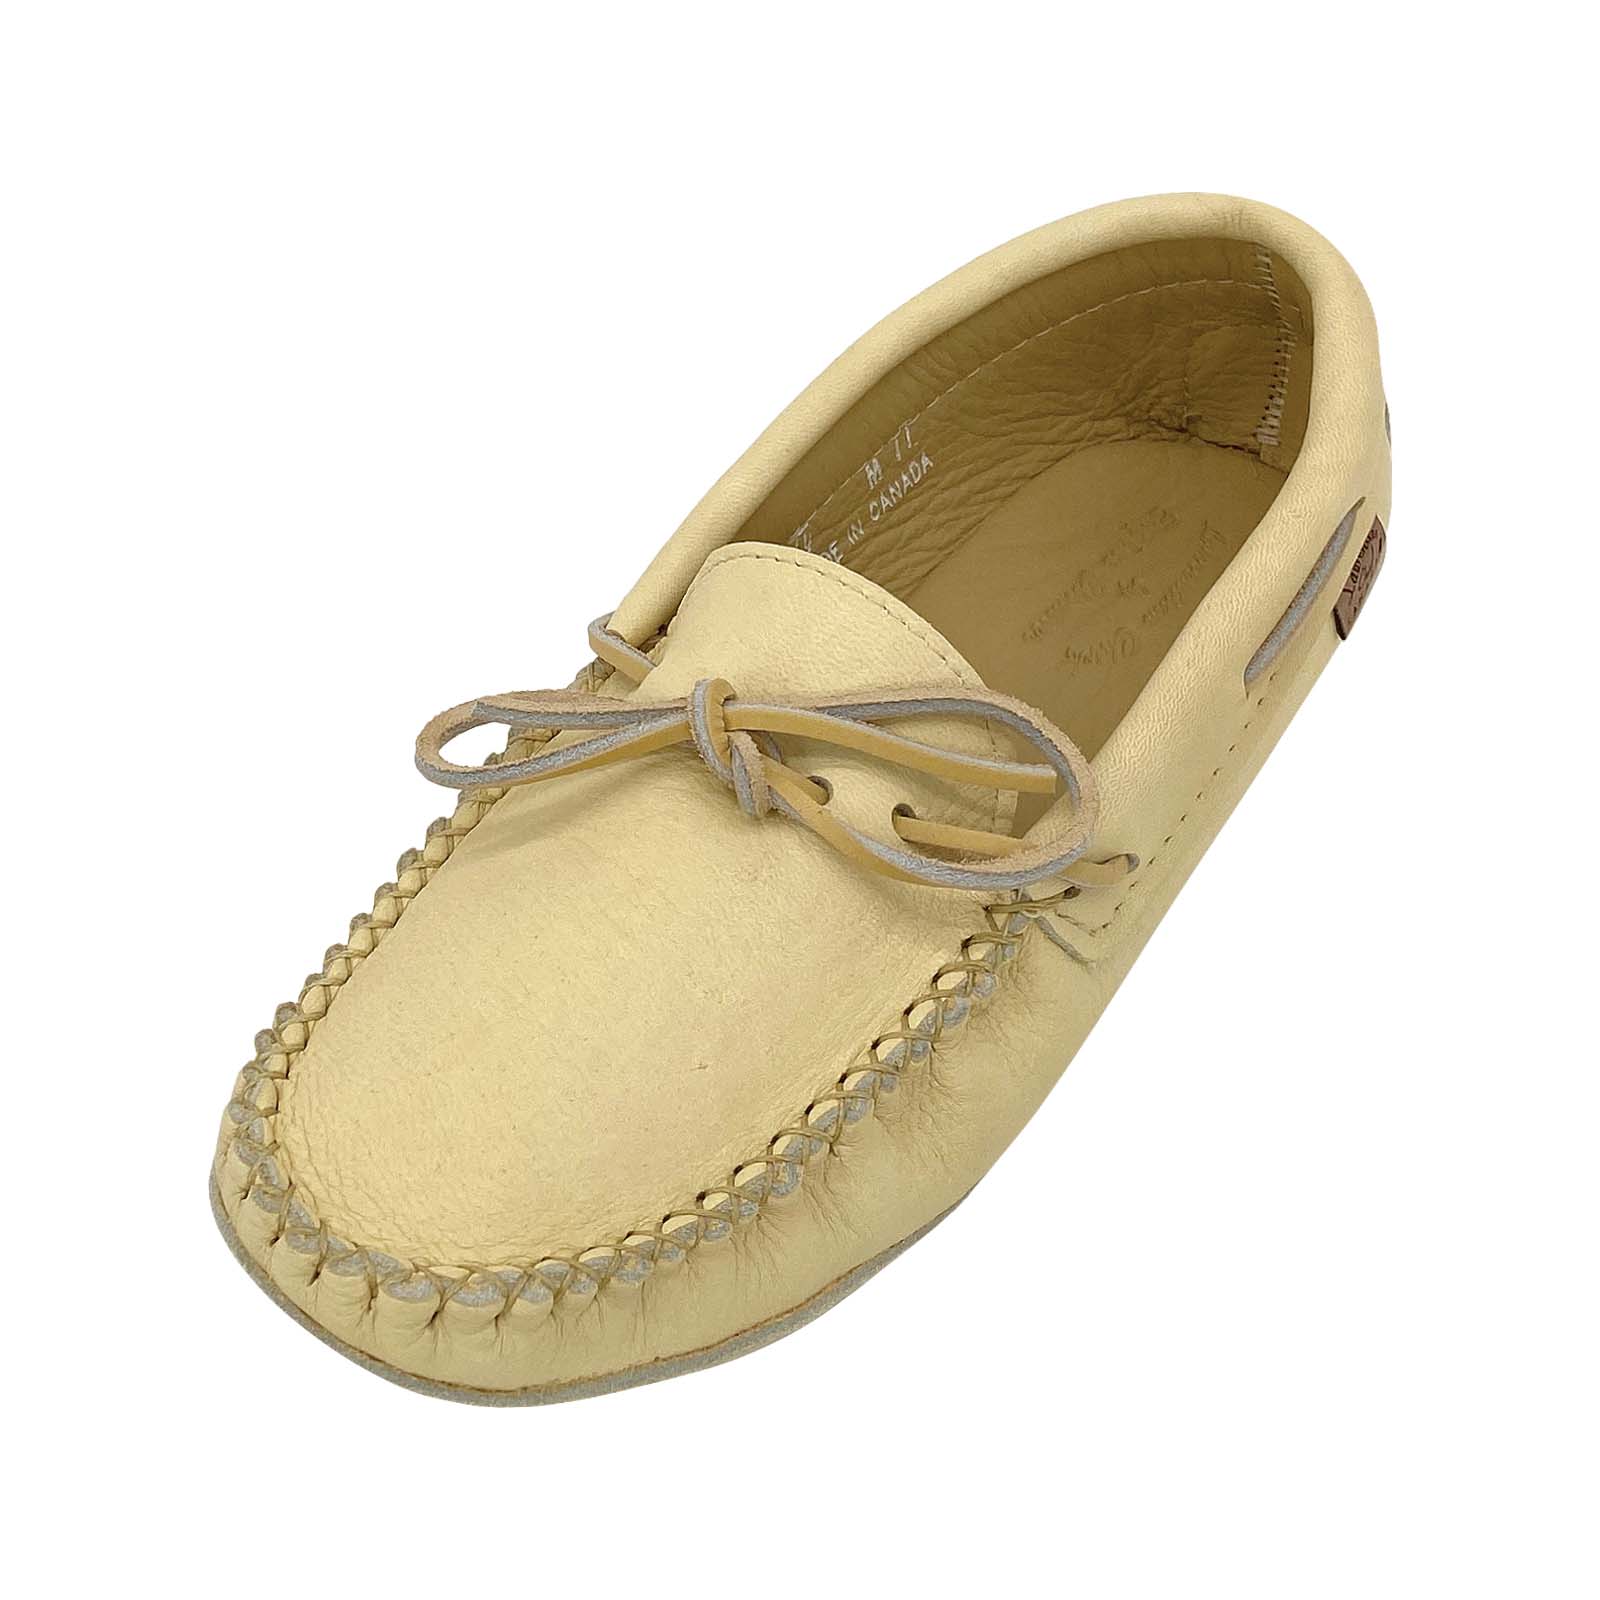 Men's Soft Sole Caribou Tan Genuine Leather Moccasin – Leather-Moccasins